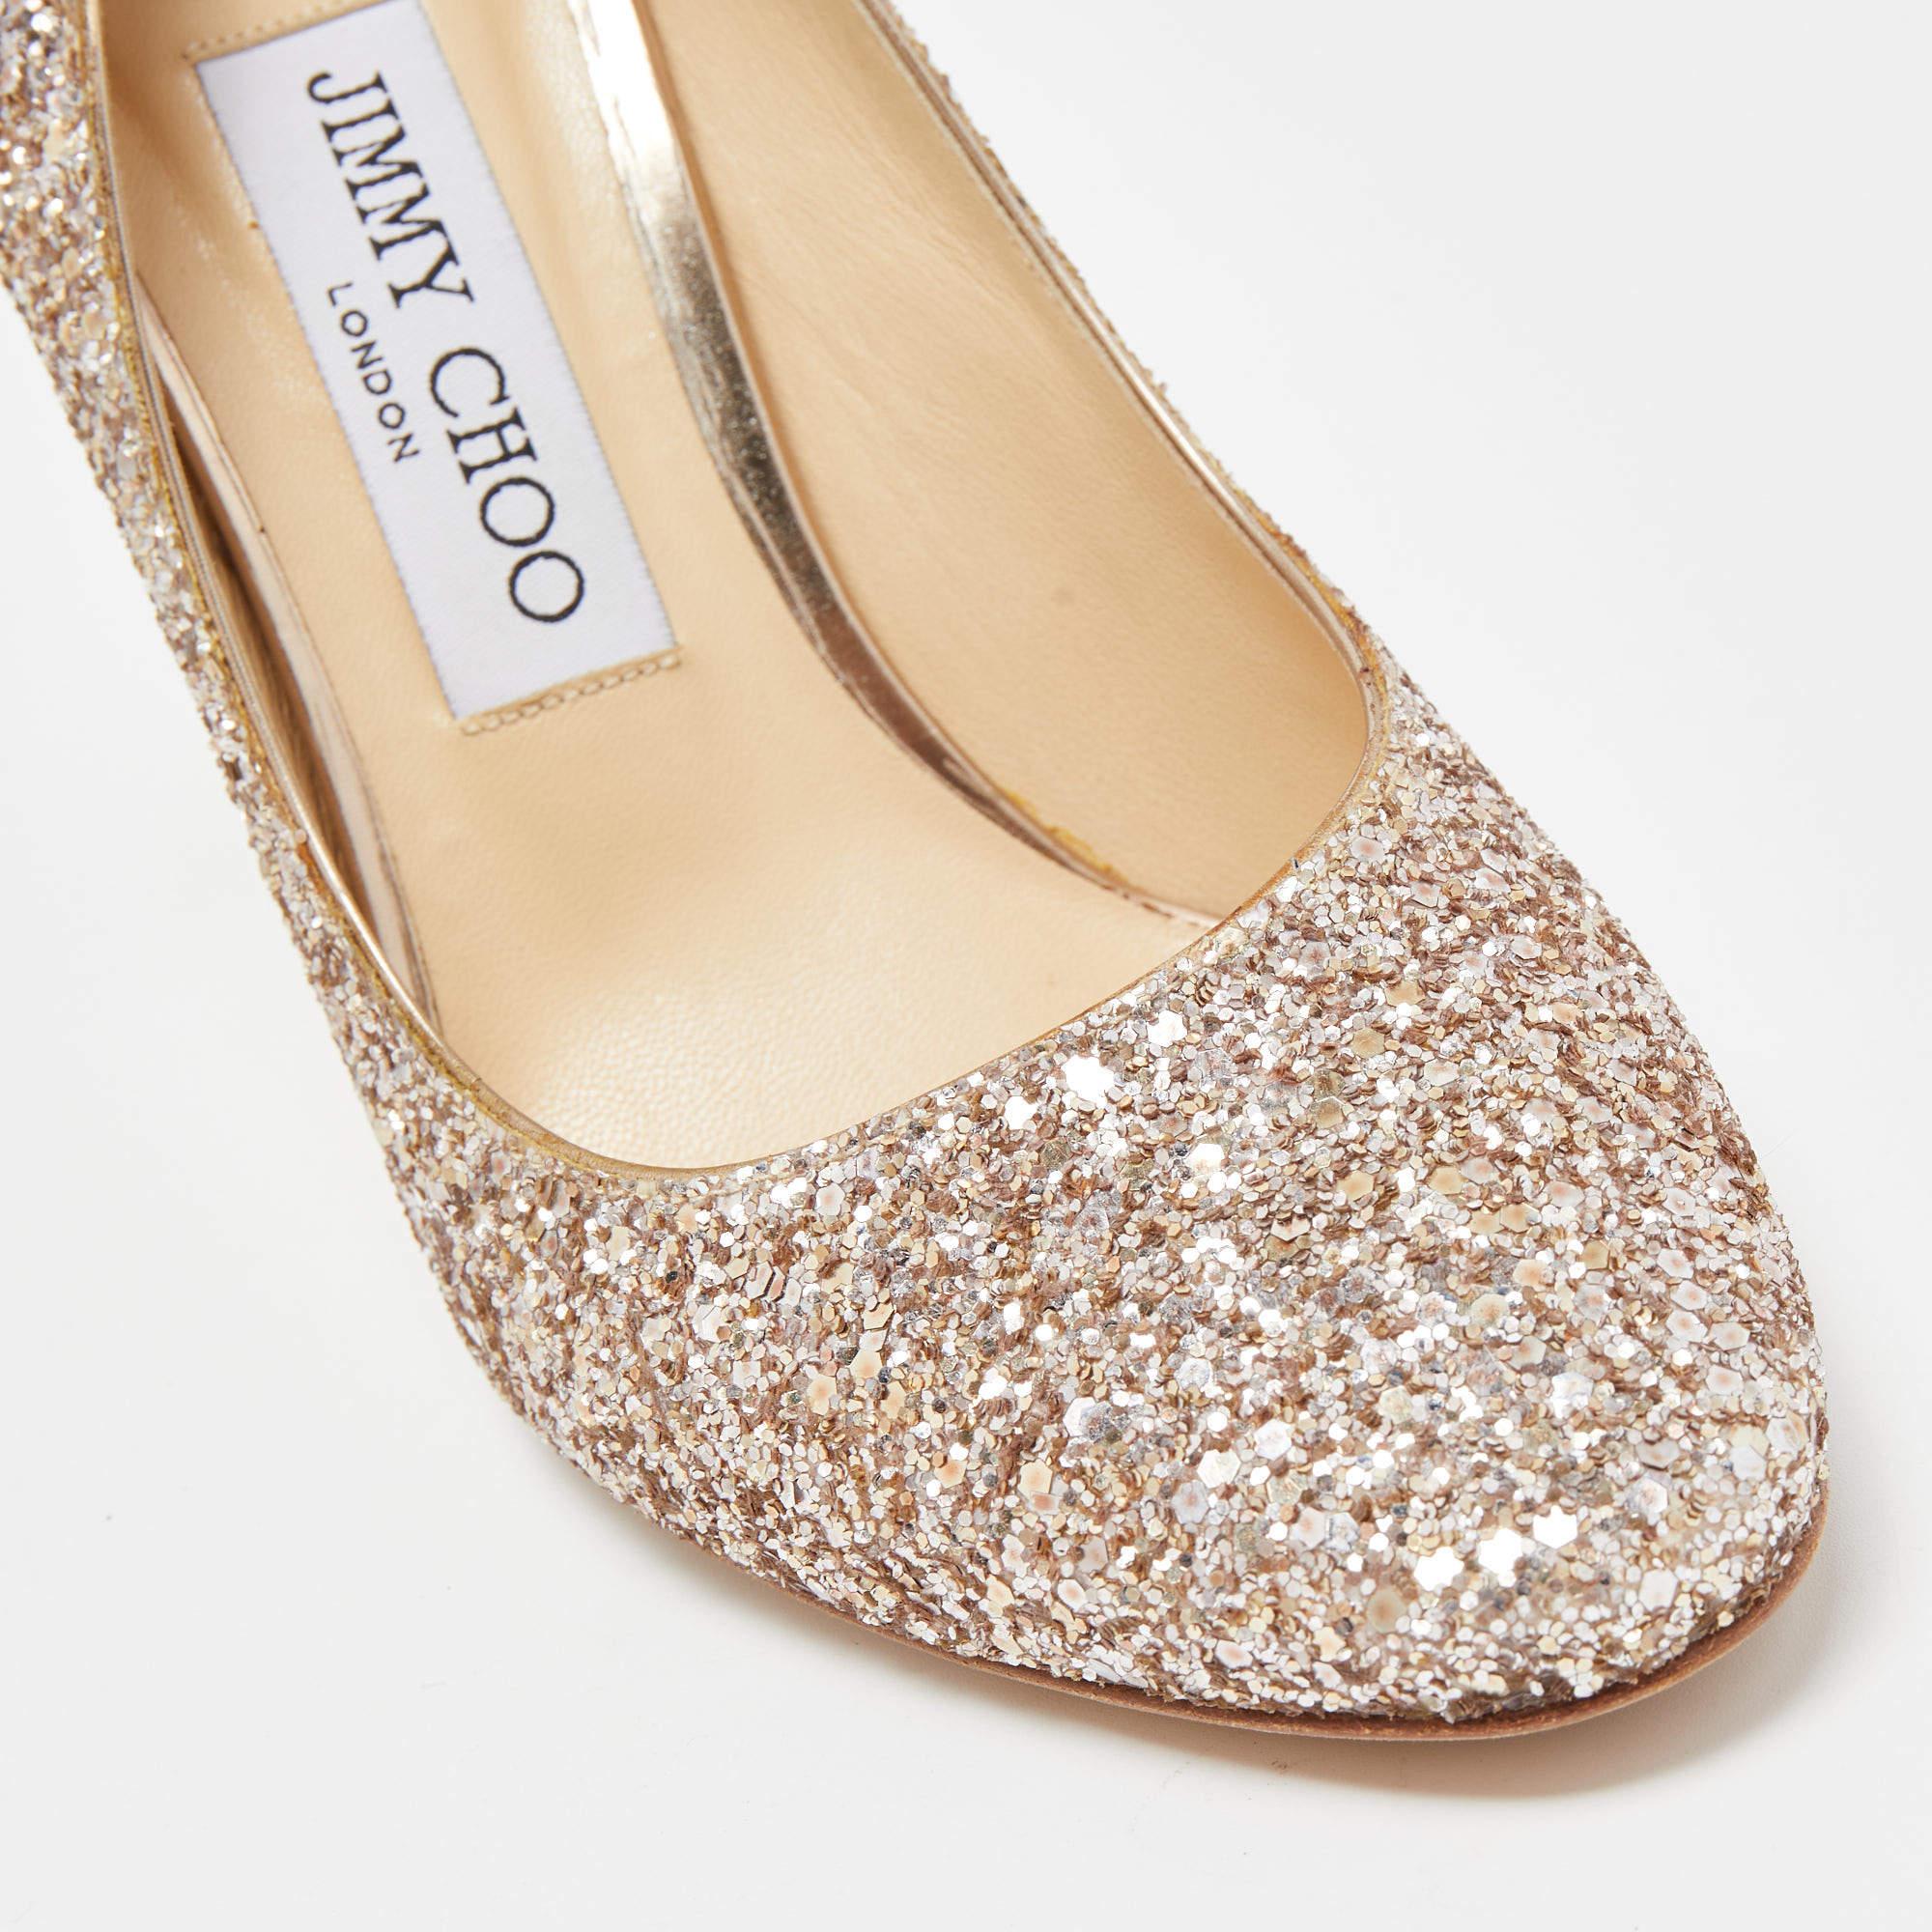 Jimmy Choo Multicolor Glitter Romy Round Toe Pumps Size 37.5 For Sale 1